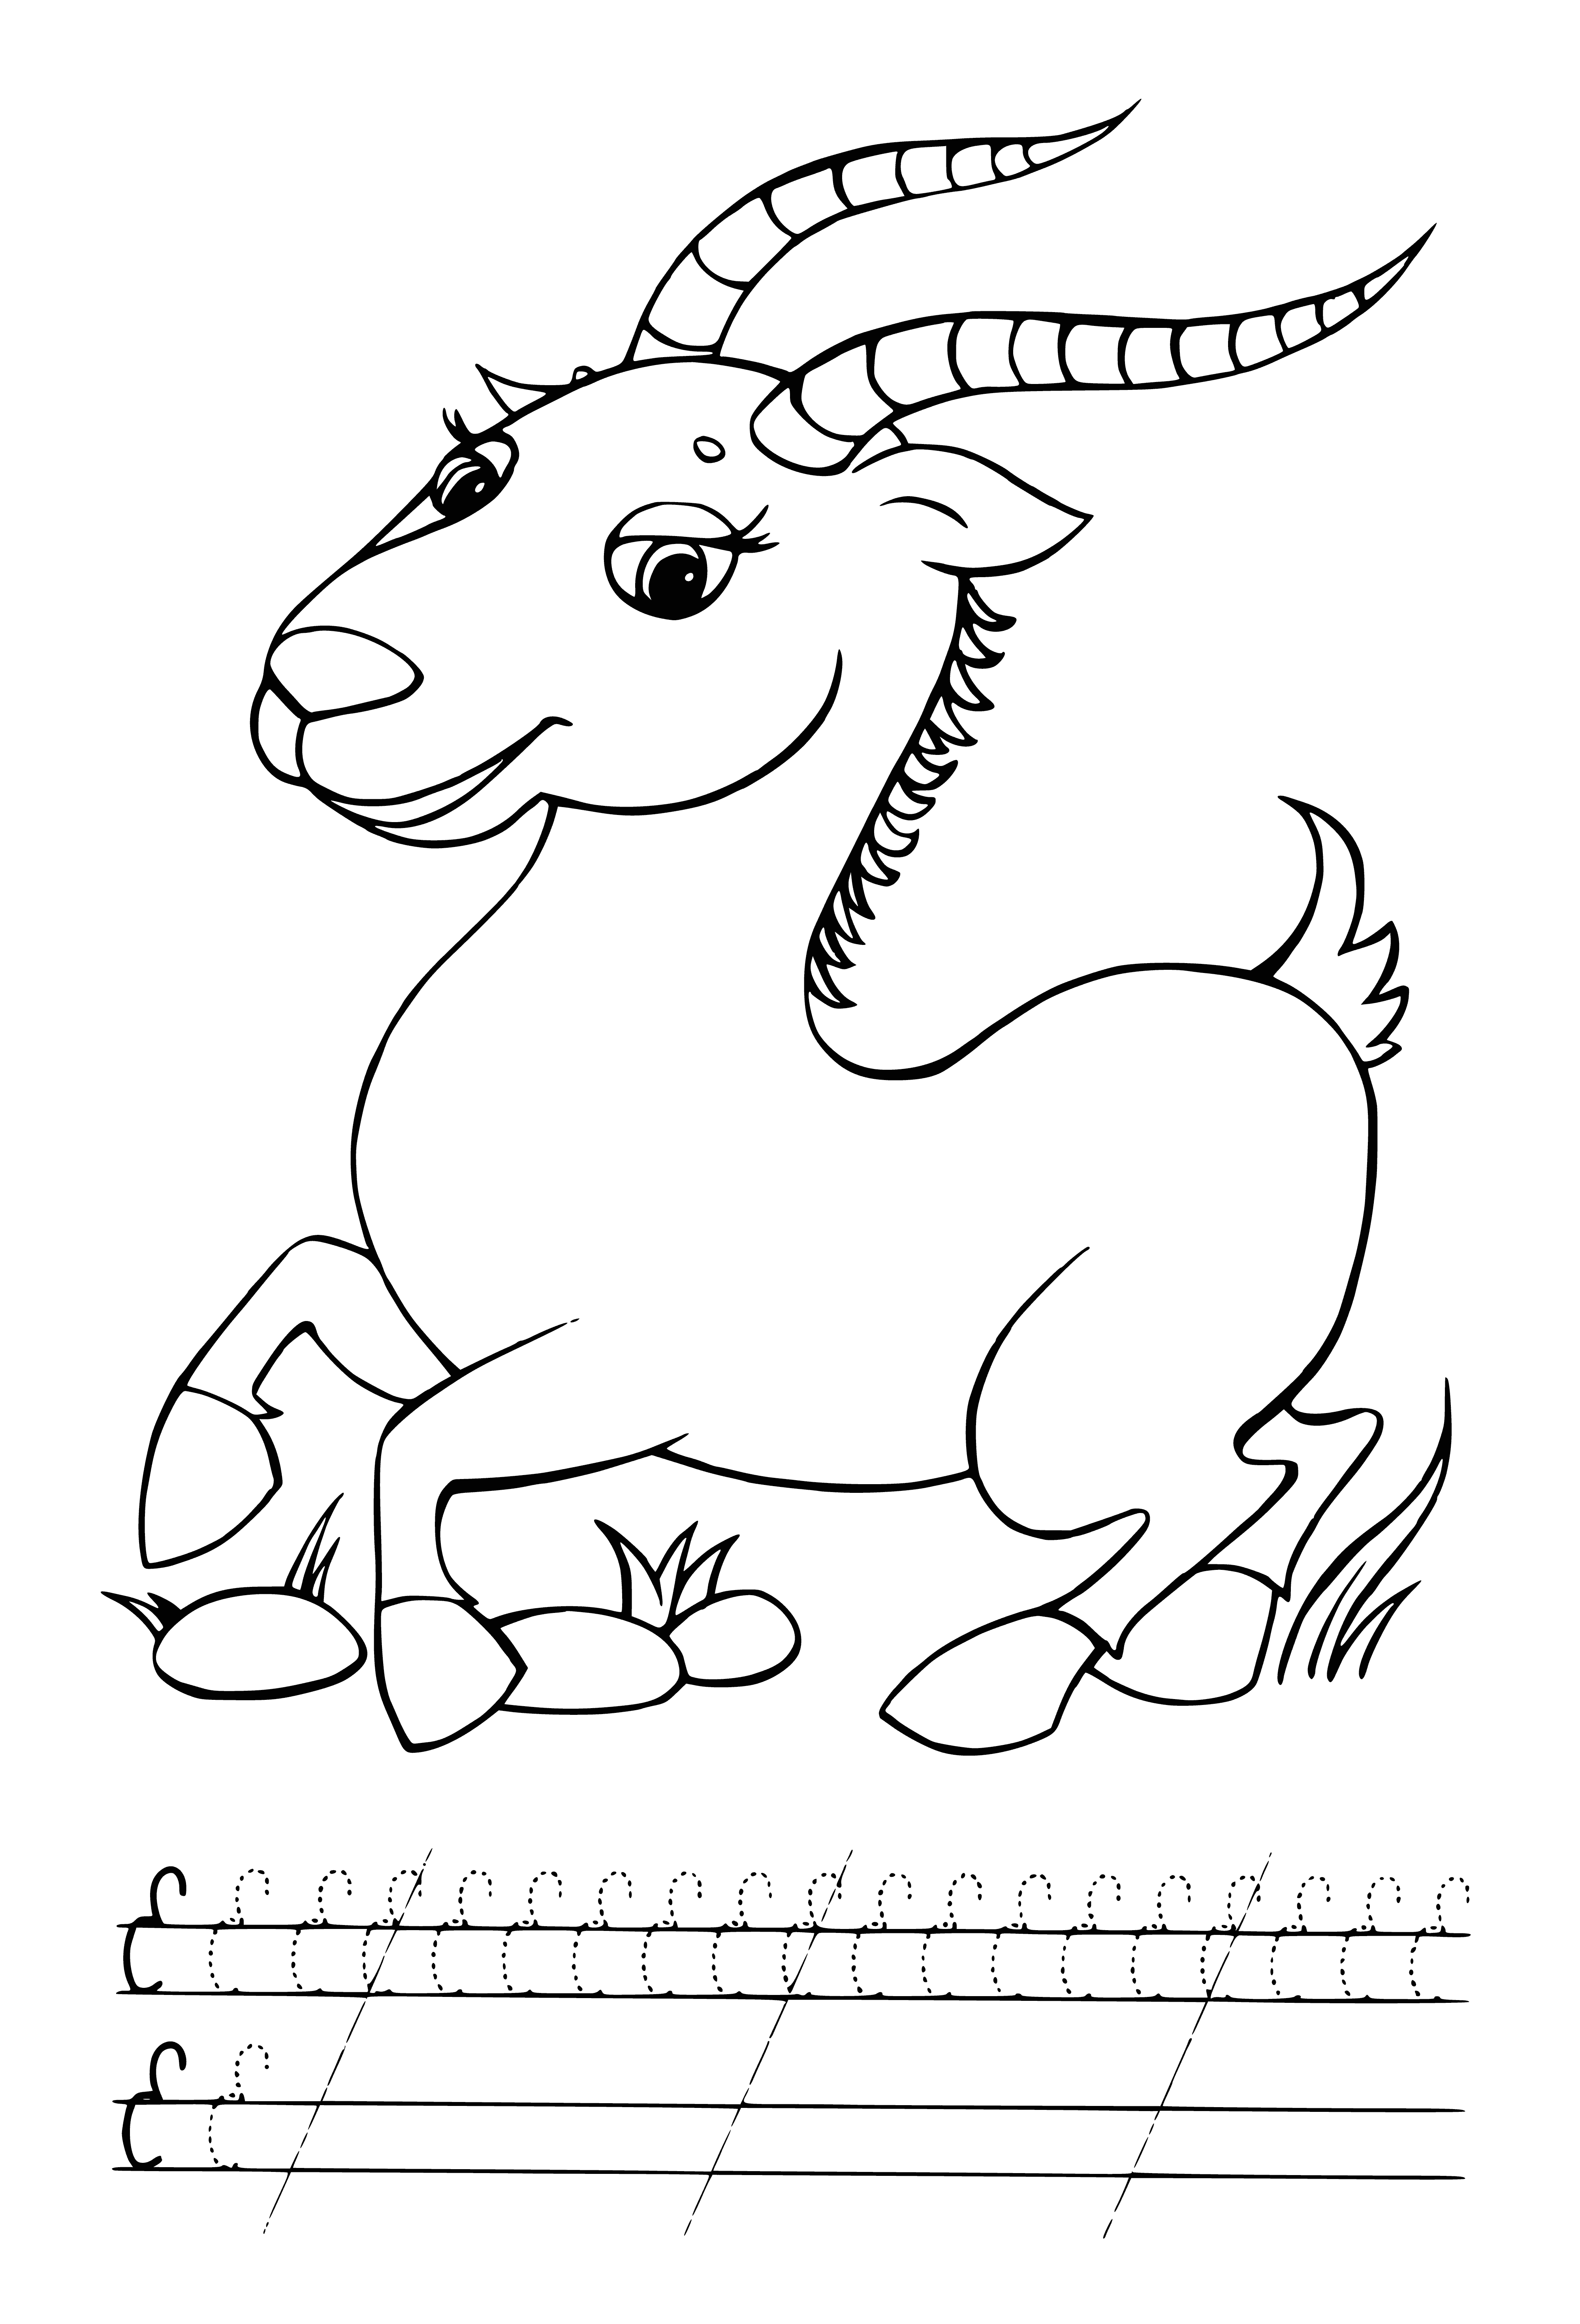 coloring page: Marinate antelope roast with onion, garlic, red wine, beef broth, rosemary, thyme, oregano, salt & pepper; then bake in oven with coated veggies for 3 hrs. Last 30 min. remove foil to brown veggies.